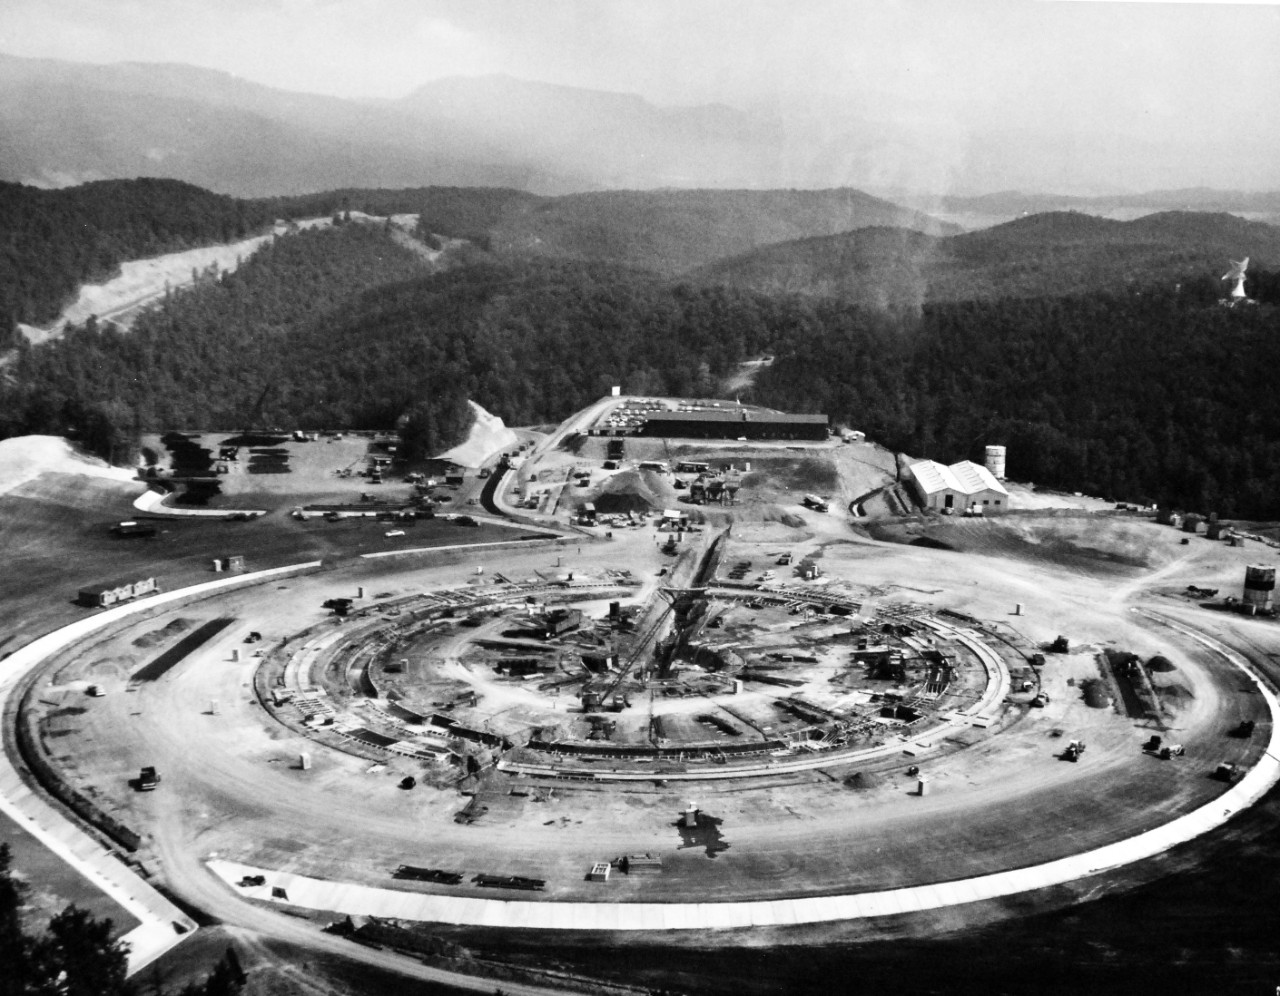 USN 710537:   Construction on the Gigantic Radio Telescope at Sugar Grove, West Virginia, September 1959.   Note, building was halted in 1962 and was never completed.   Official U.S. Navy Photograph, now in the collections of the National Archives.  